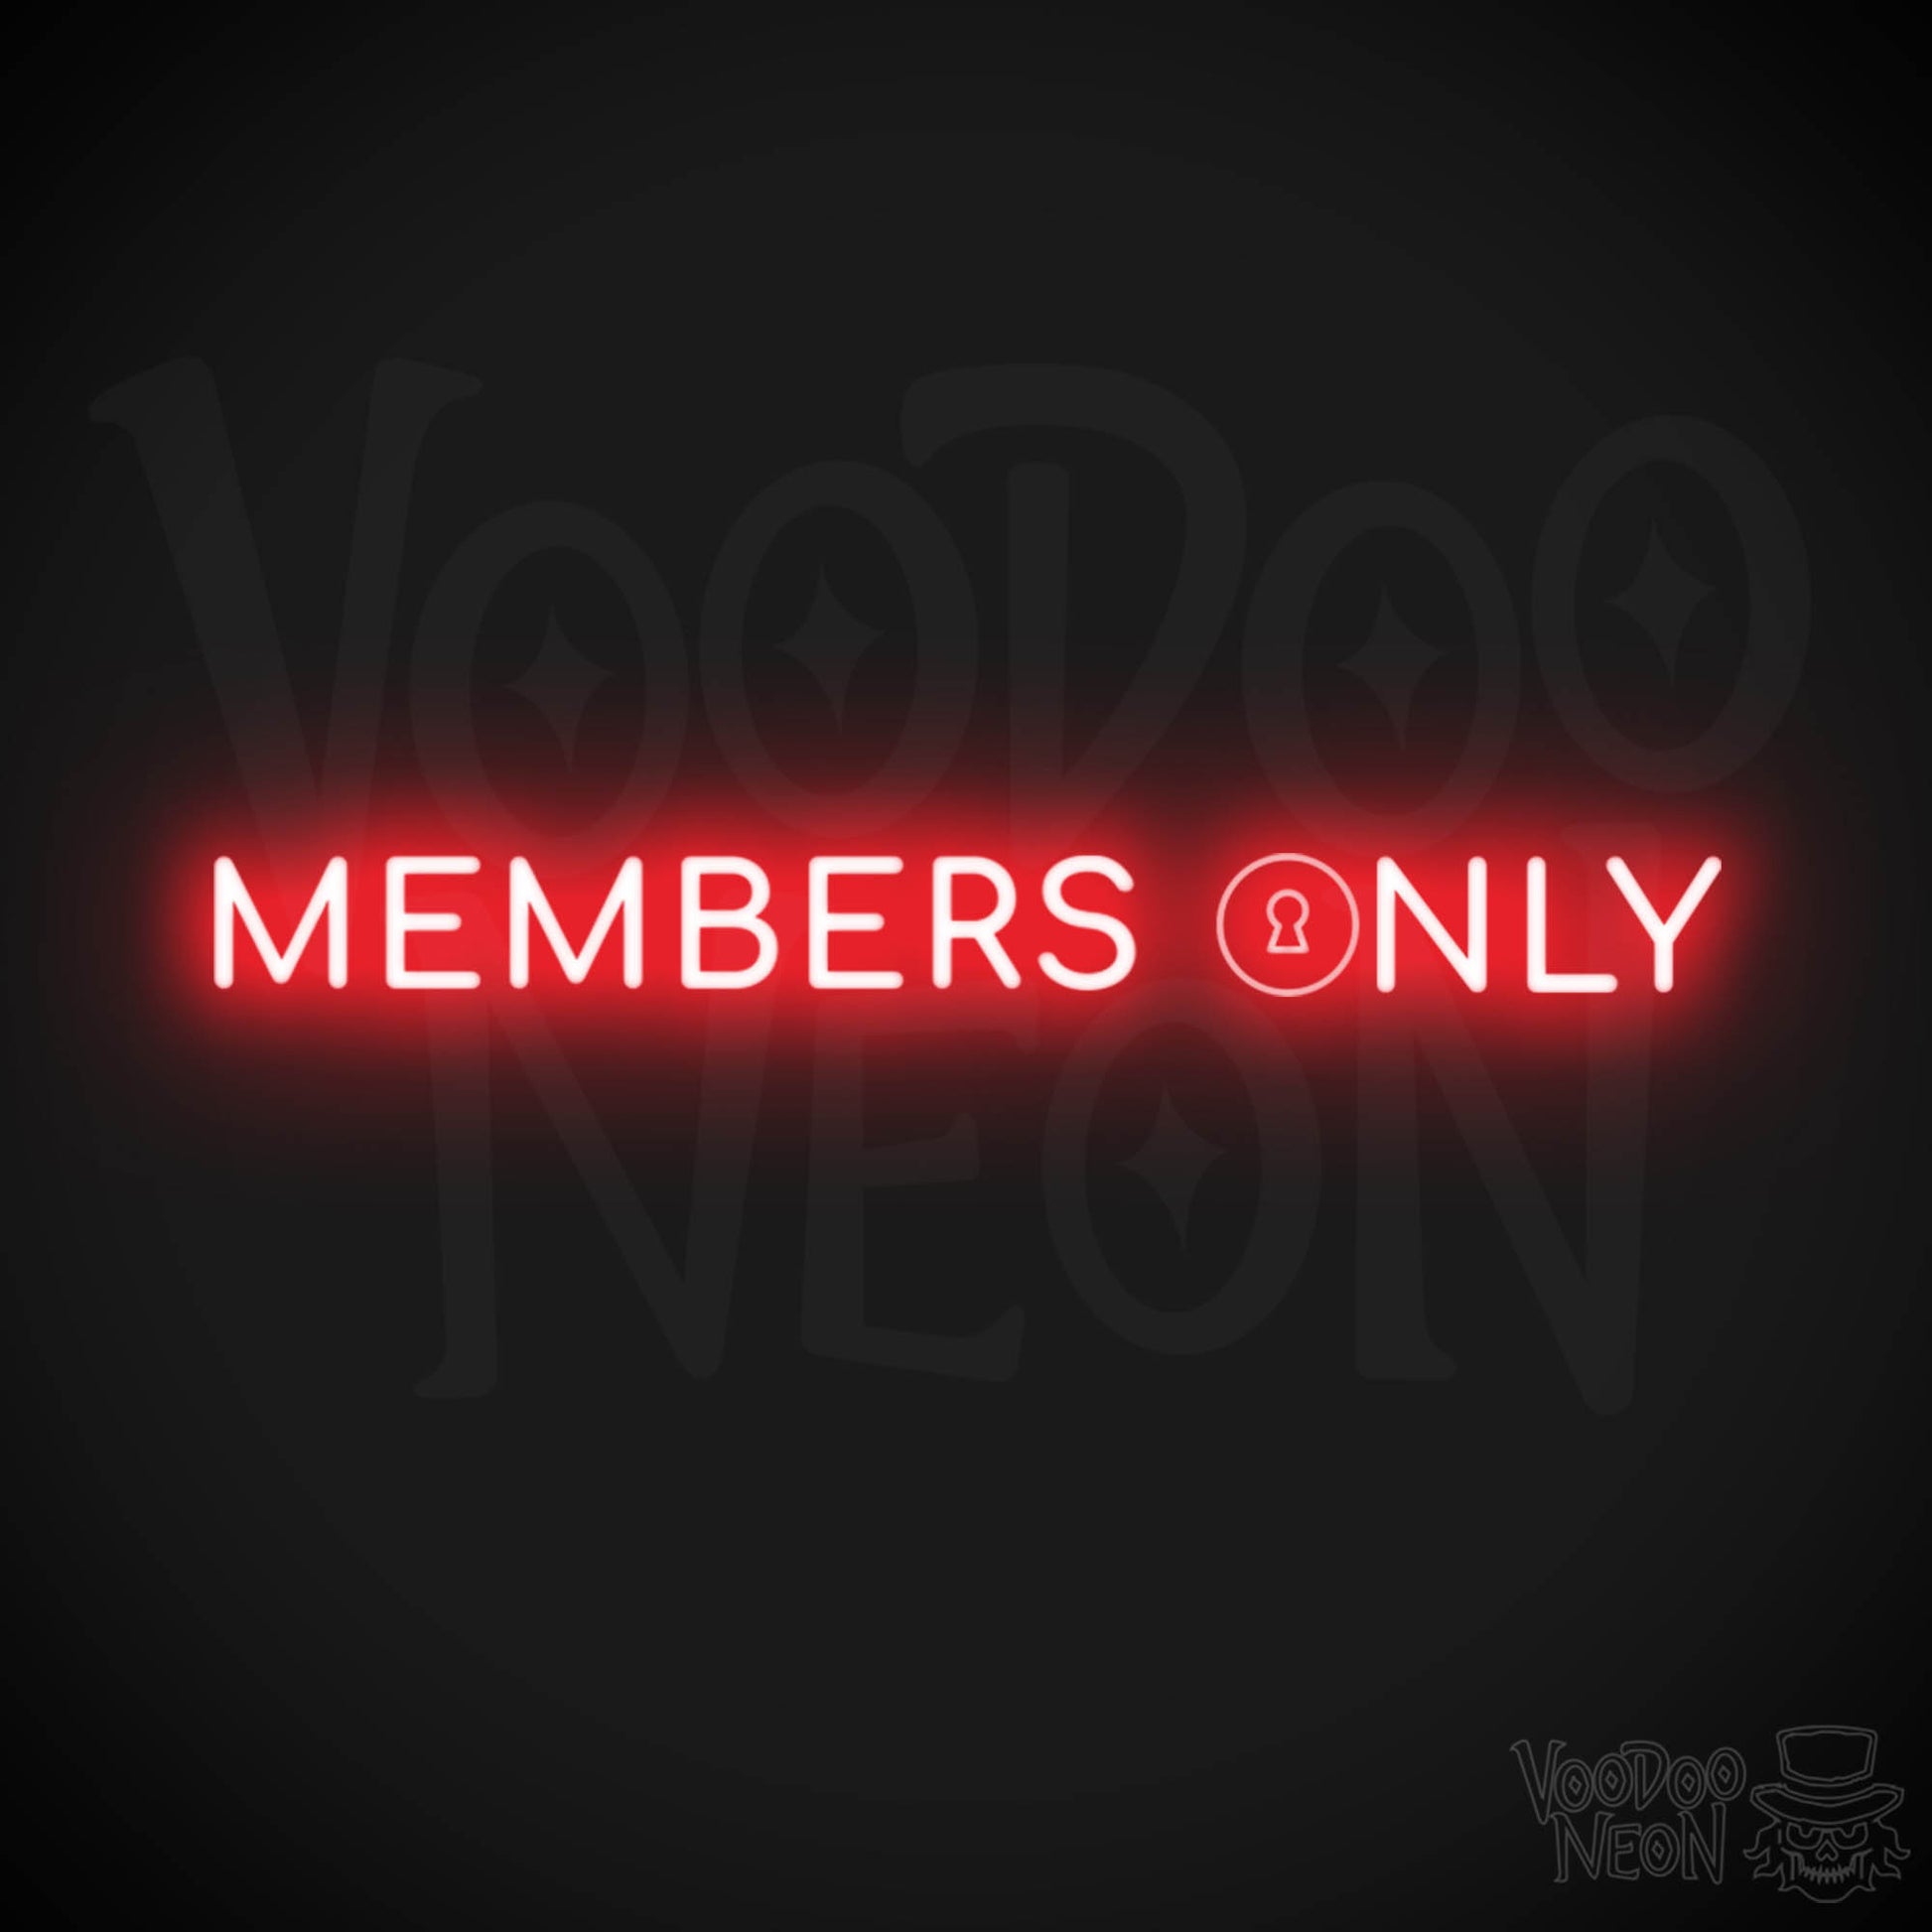 Members Only Neon Sign - Neon Members Only Sign - Color Red